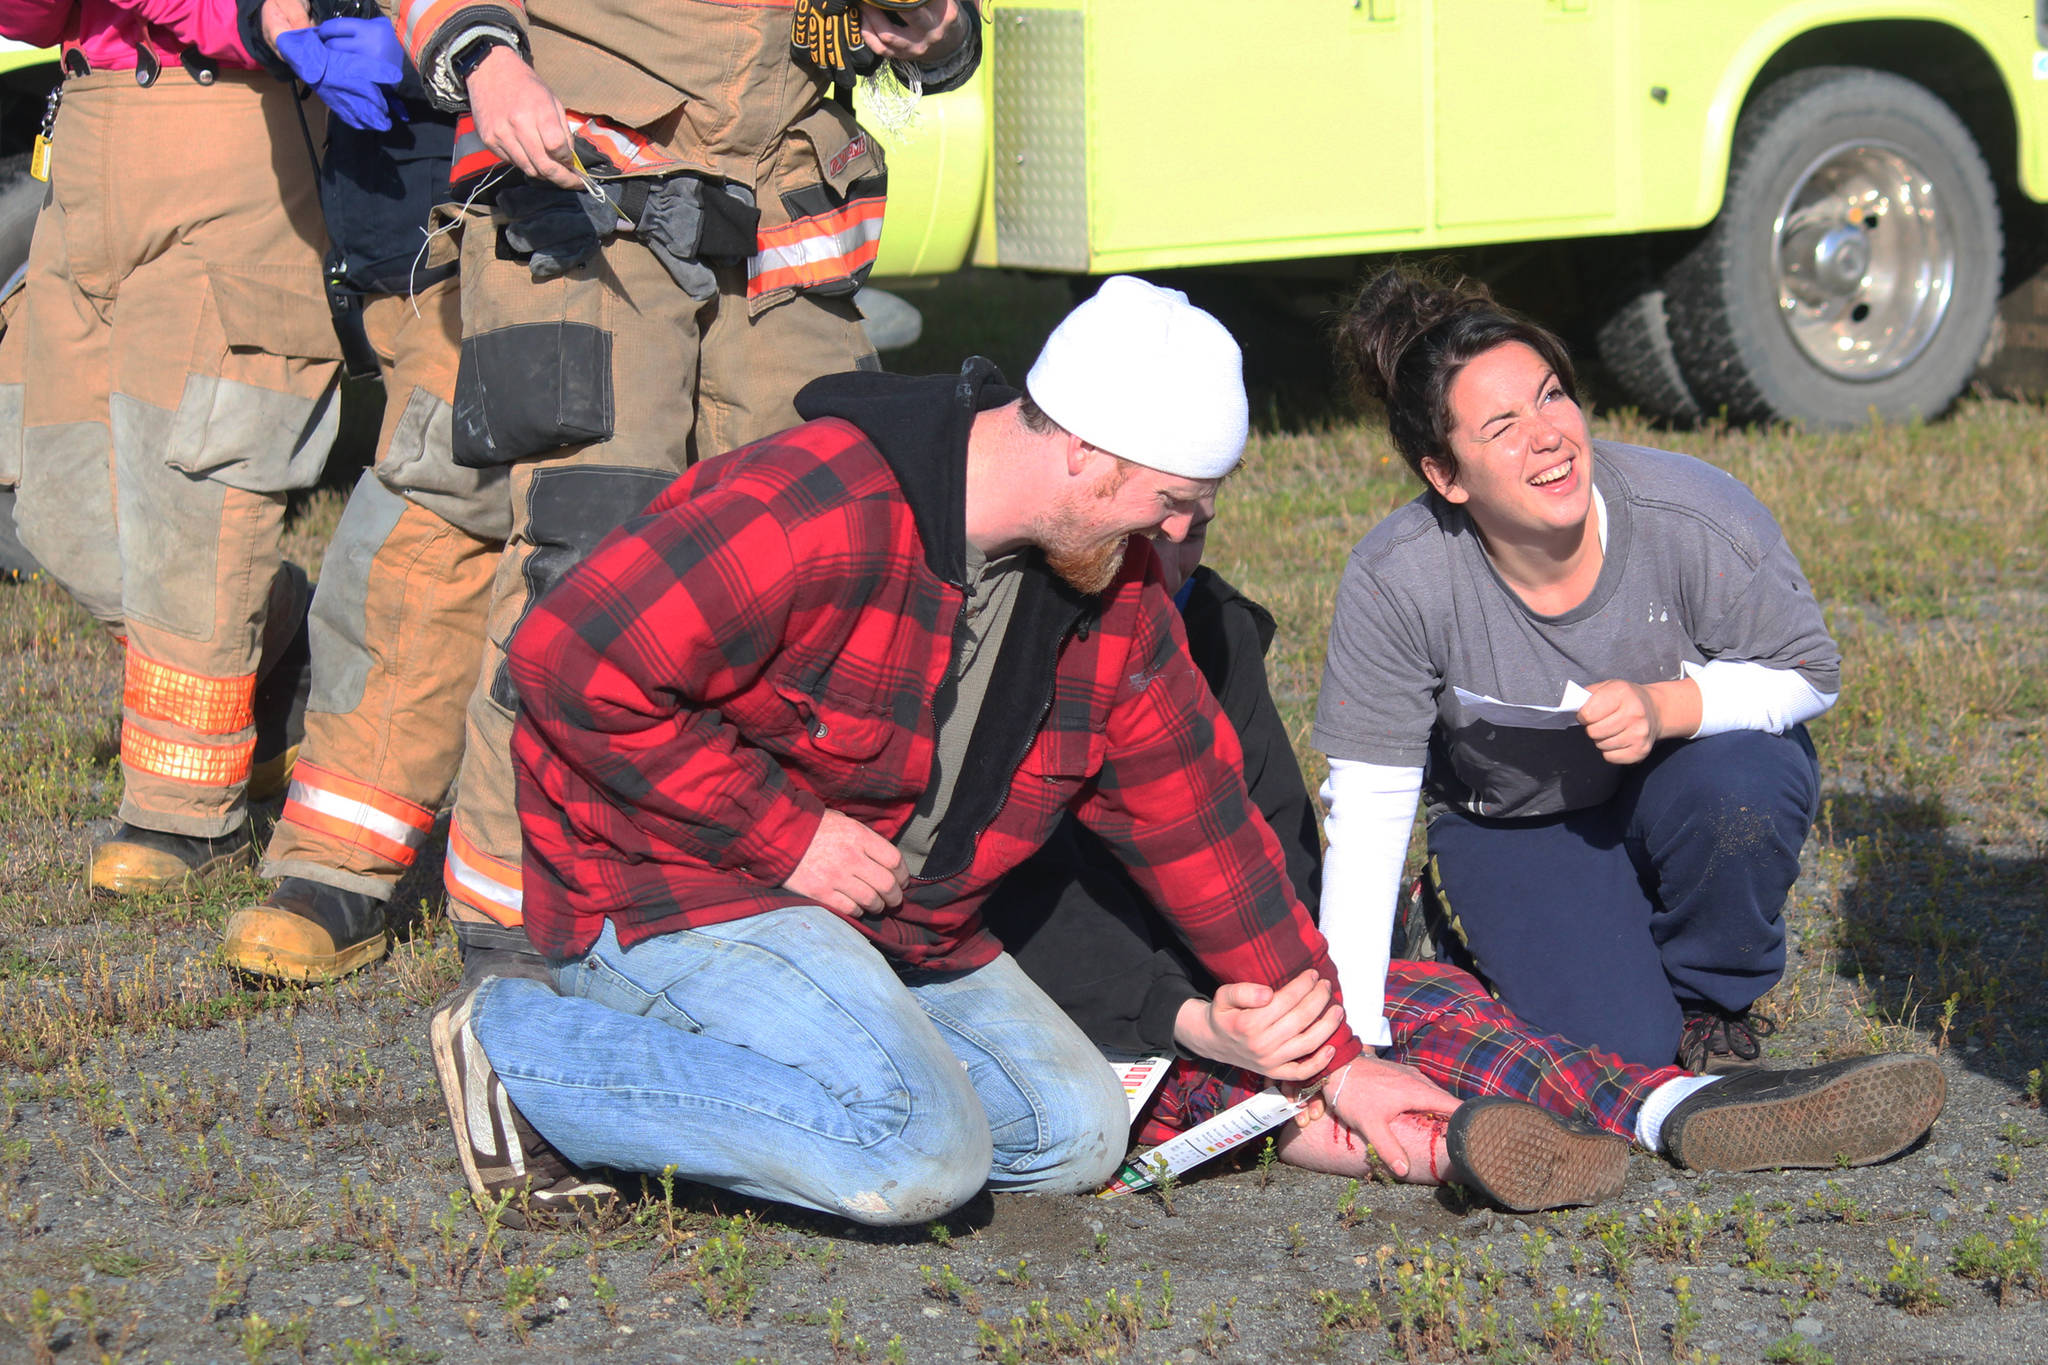 Stephen Rainwater (left) and Jaclyn Rainwater (right) hold onto a fake wound on Ben Rainwater’s leg during a simulated plane crash exercise Saturday, Aug. 19, 2017 at the Homer Airport in Homer, Alaska. They were some of more than 20 volunteers who turned out to pose as crash victims during the drill that takes place at the airport every three years. (Photo by Megan Pacer/Homer News)